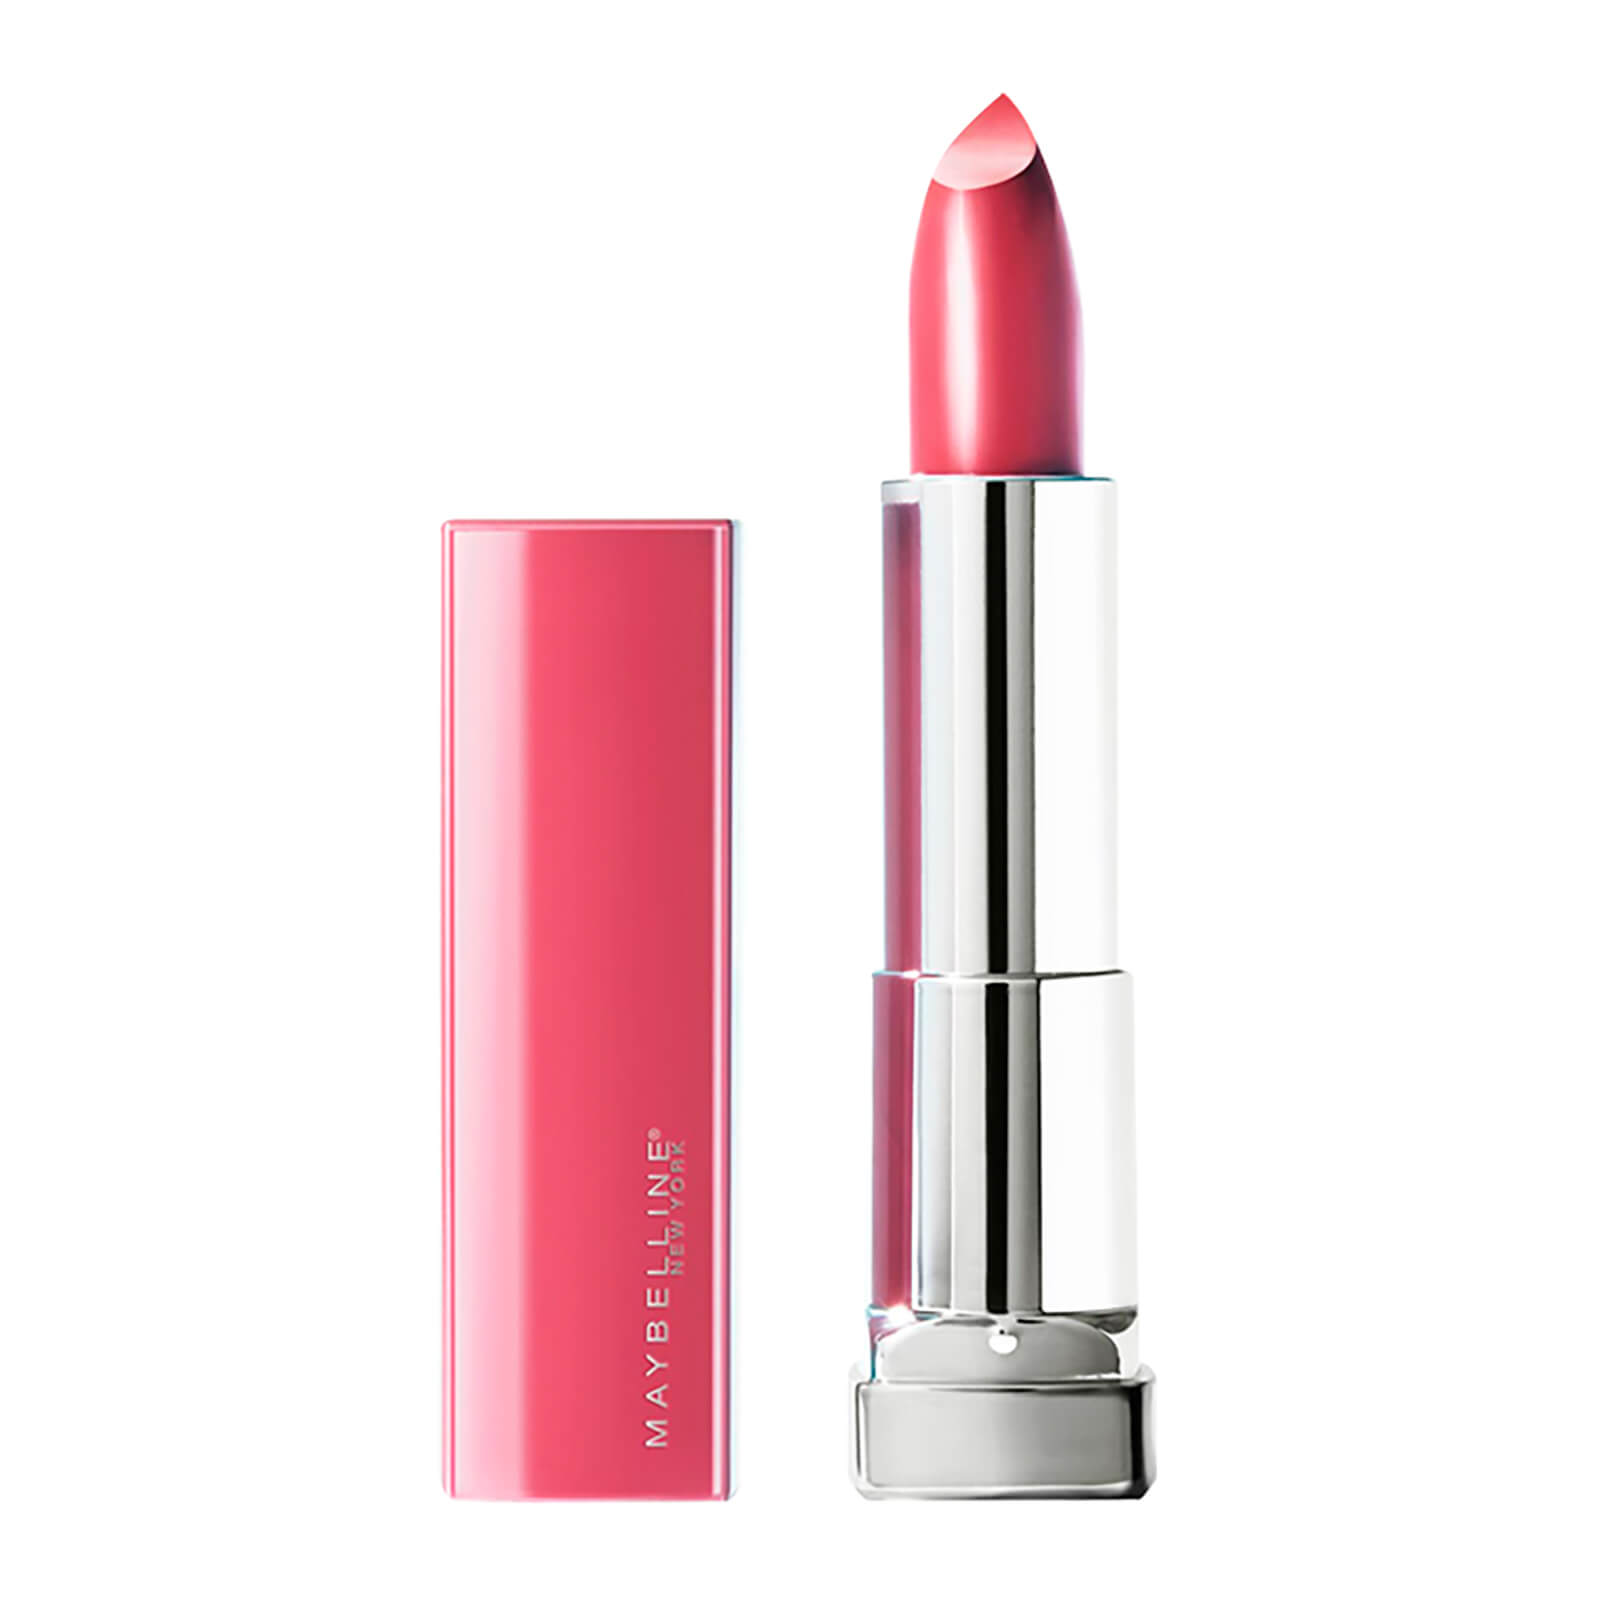 Maybelline Color Sensational Made for All Lipstick 10g (Various Shades) - 376 Pink for Me